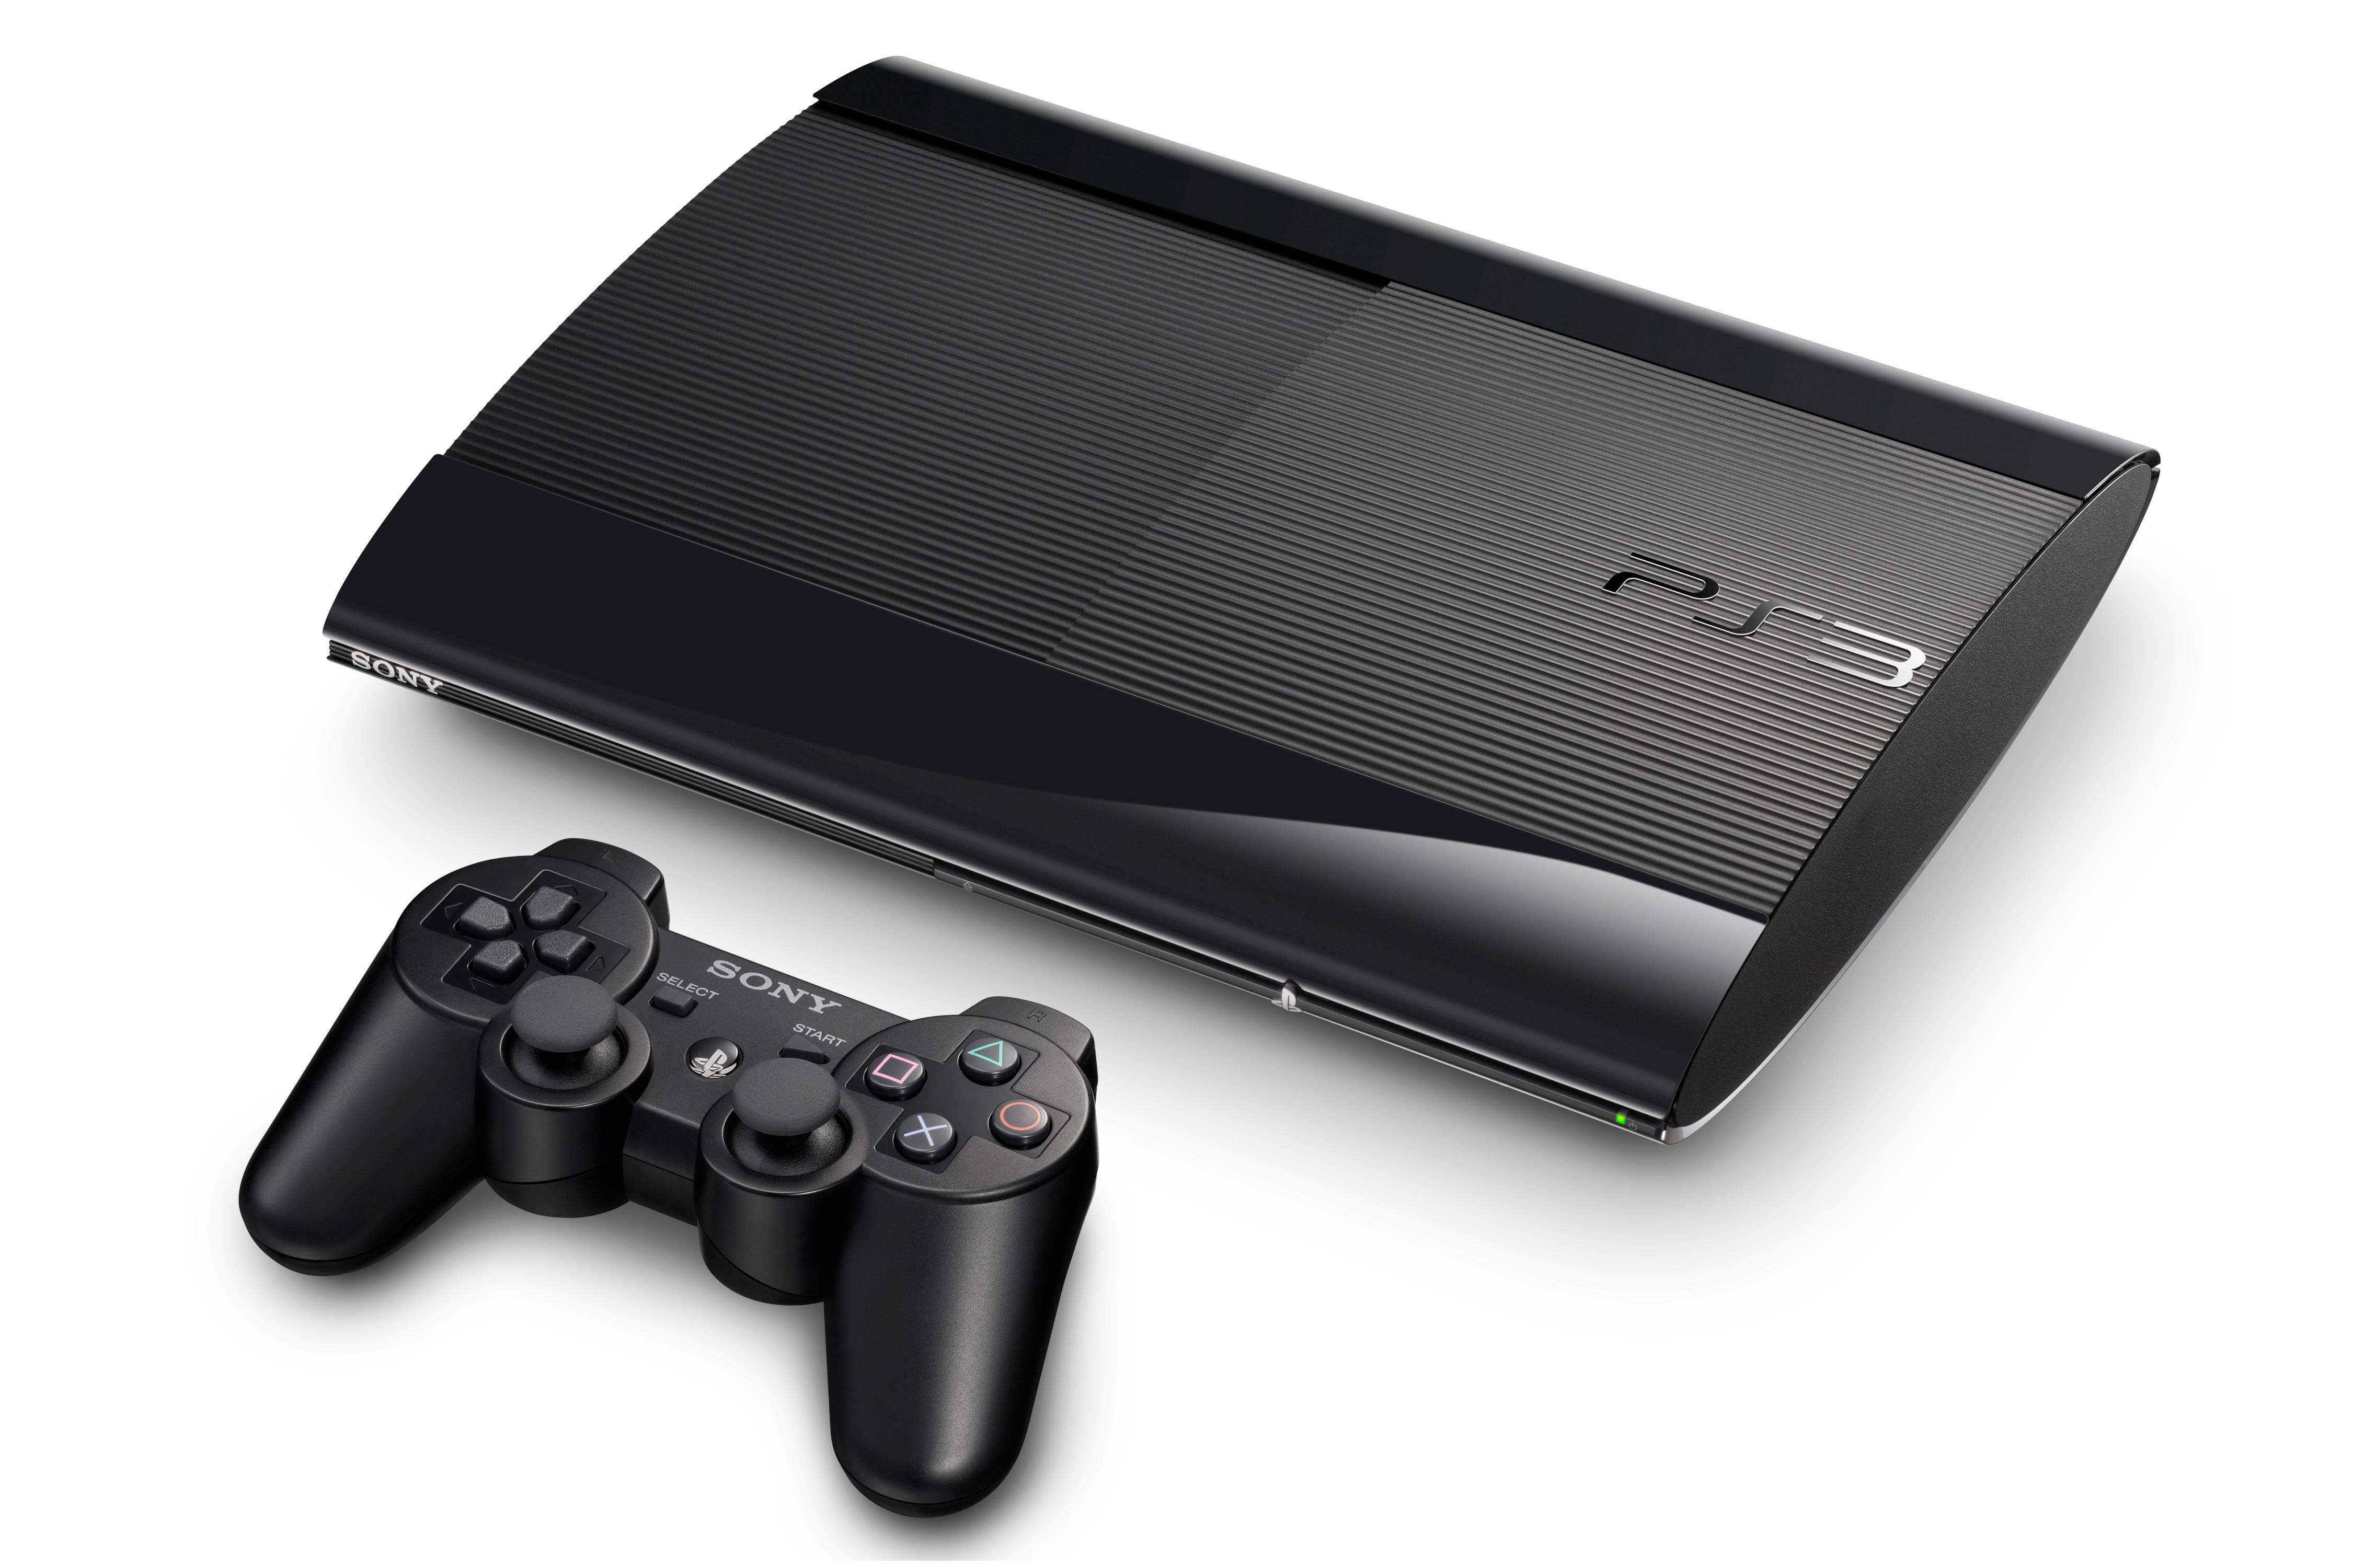 PlayStation Now is discontinuing service on PS3, Vita and PlayStation TV